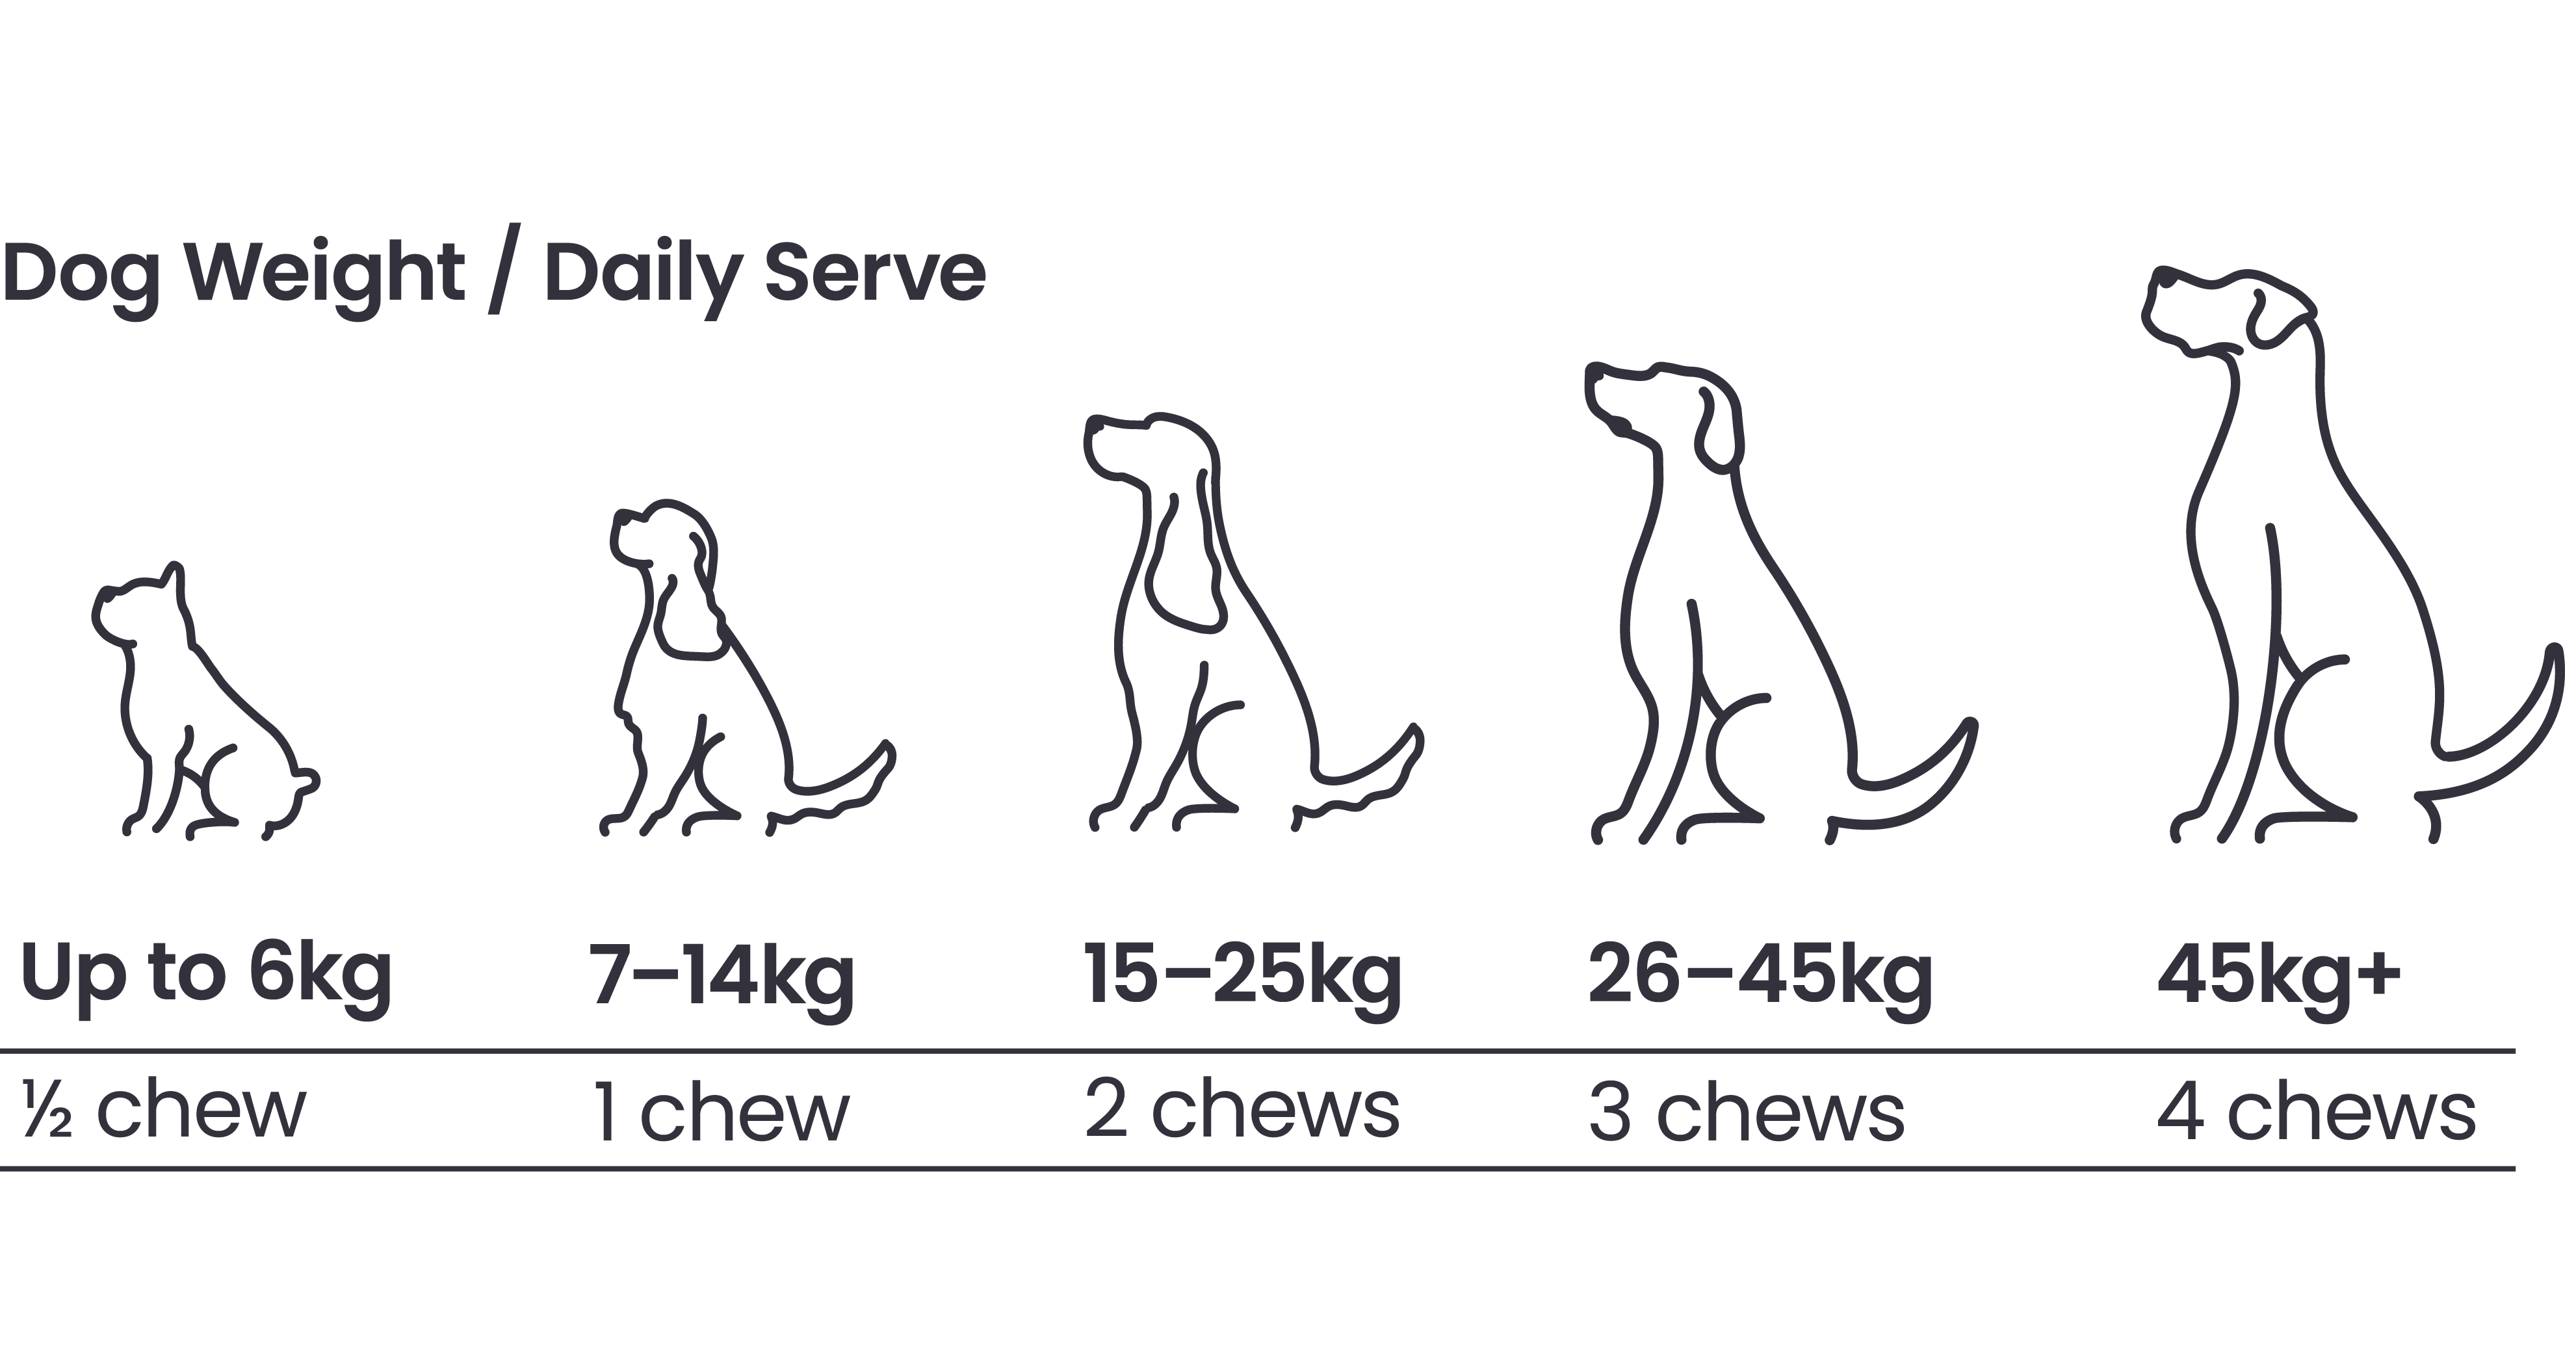 ZamiPet Urinary Support feeding guide. For dogs up to 6kg, 1/2 chew per day. For 7-14kg dogs, 1 chew per day. For 15-25kg dogs, 2 chews per day. For 26-45kg dogs, 3 chews per day. For dogs 45kg and over, 4 chews per day. 